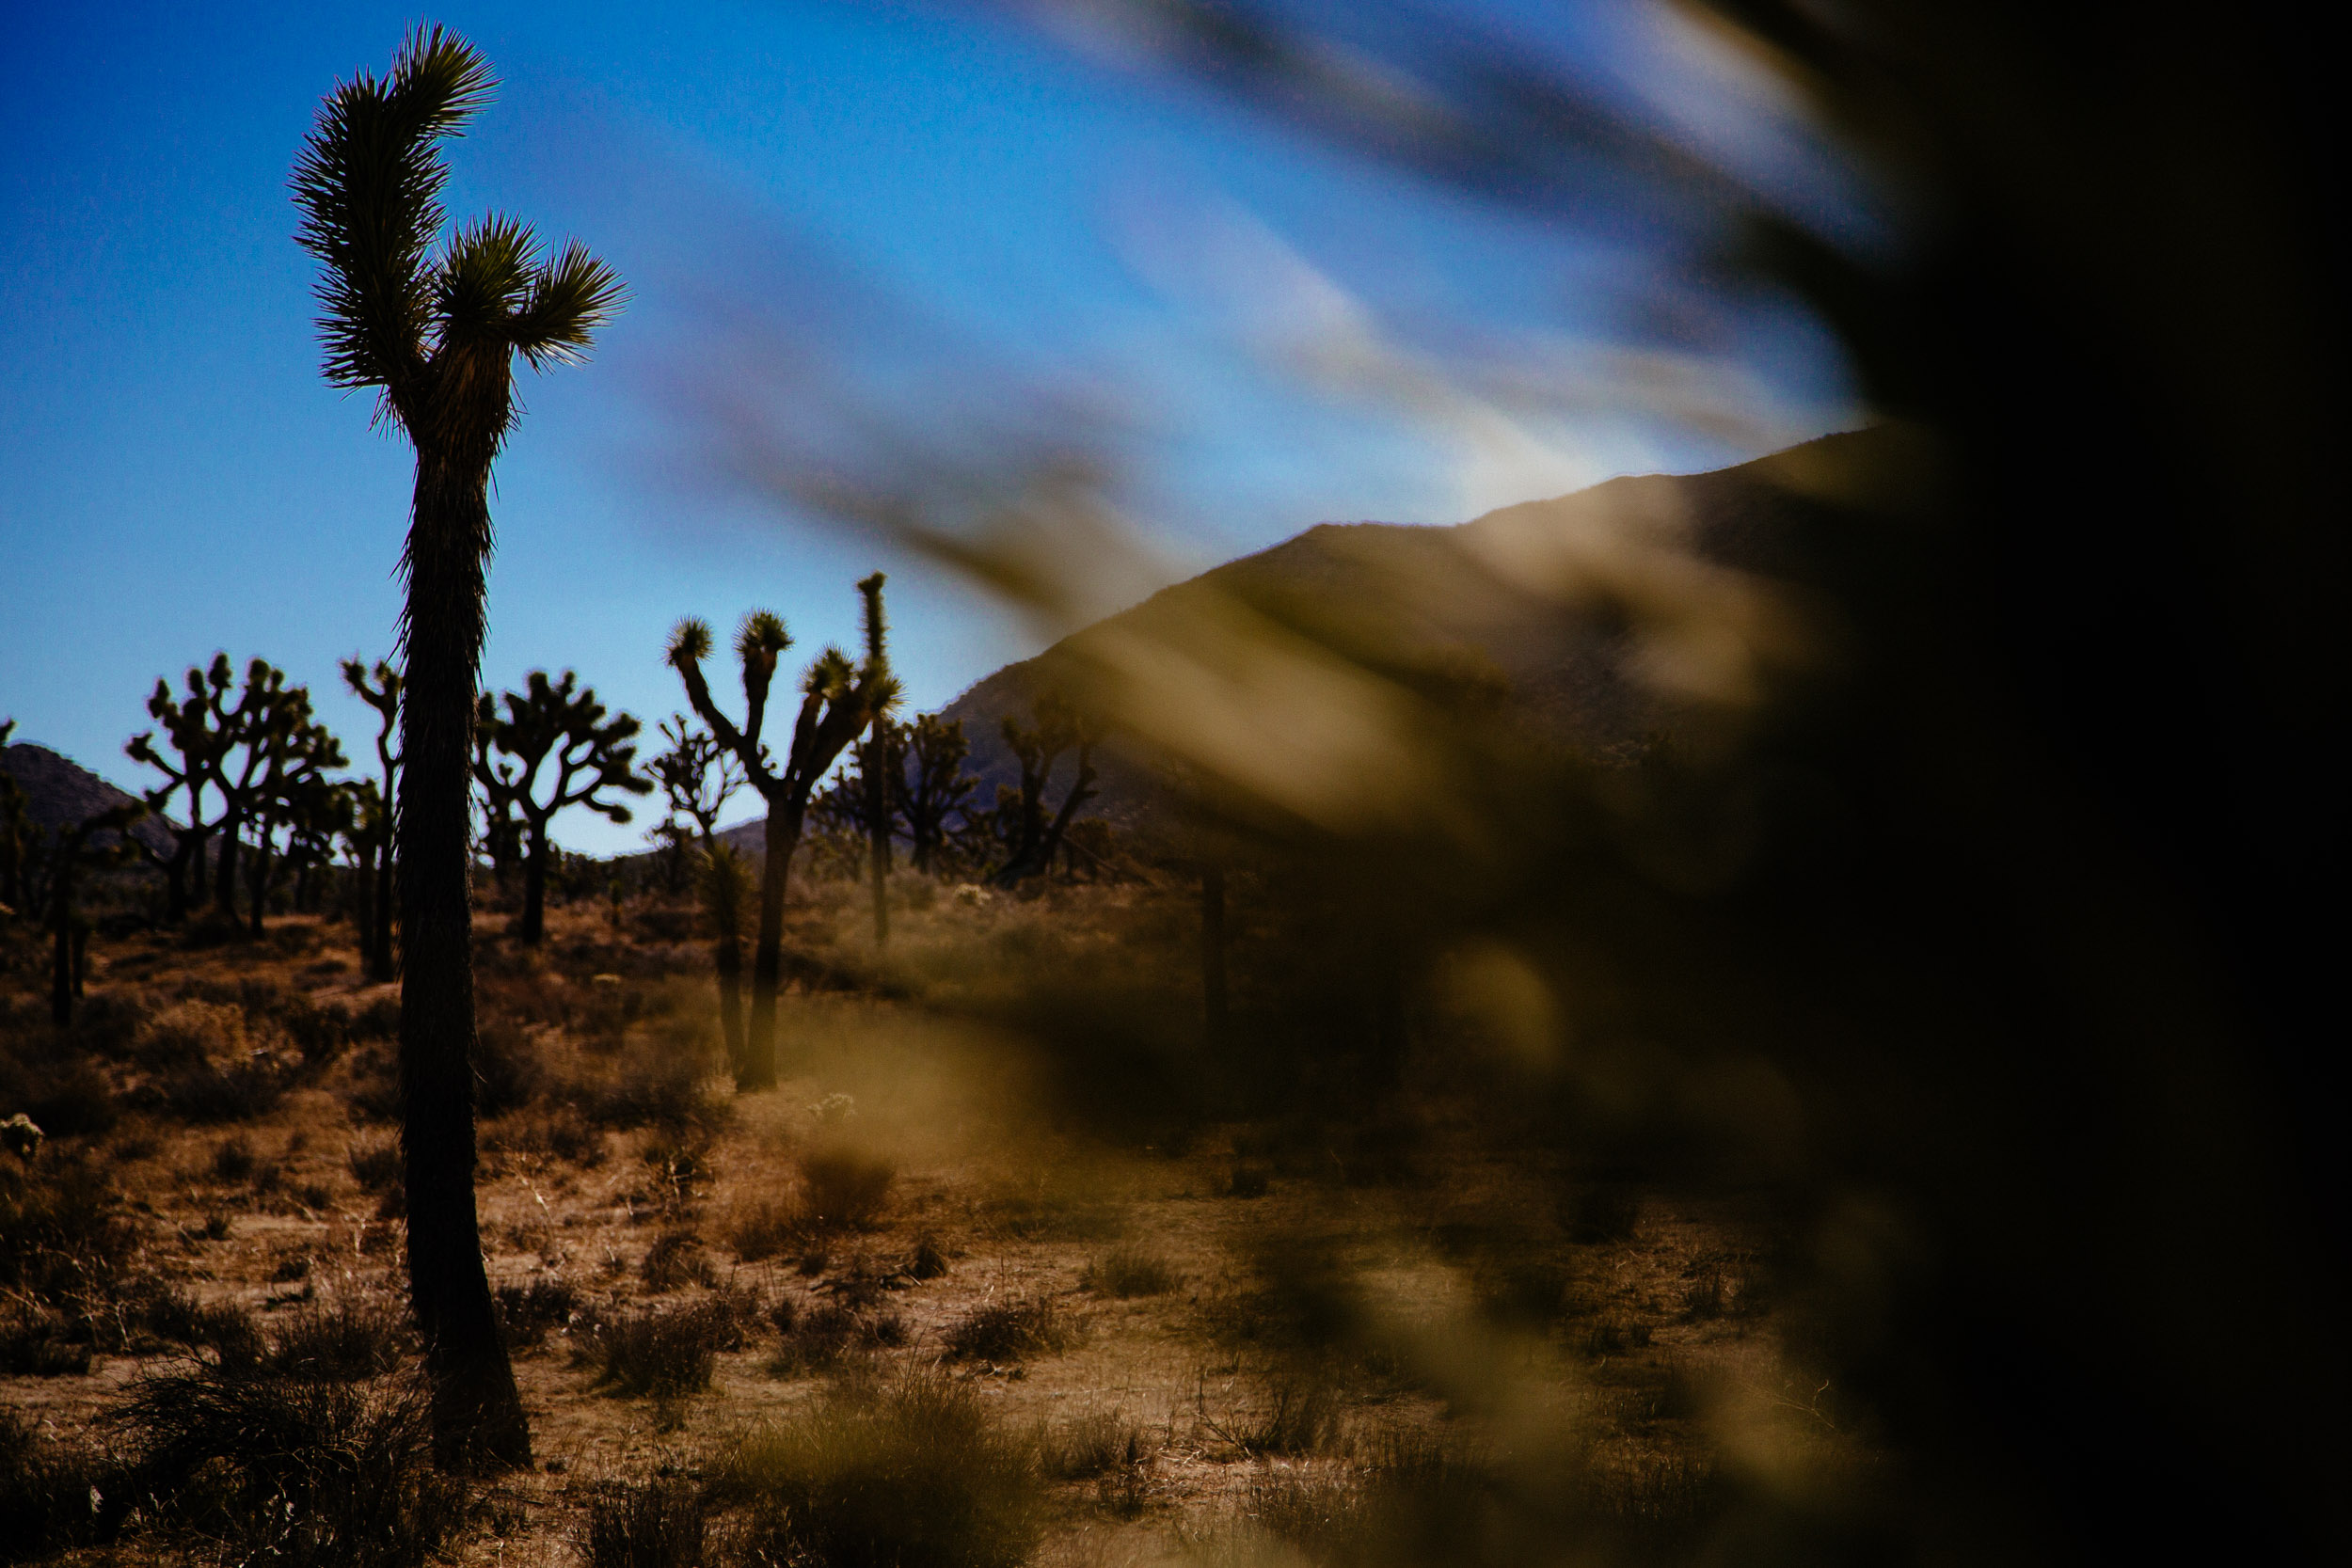 Joshua Trees litter the landscape, waiting patiently for the next rainfall